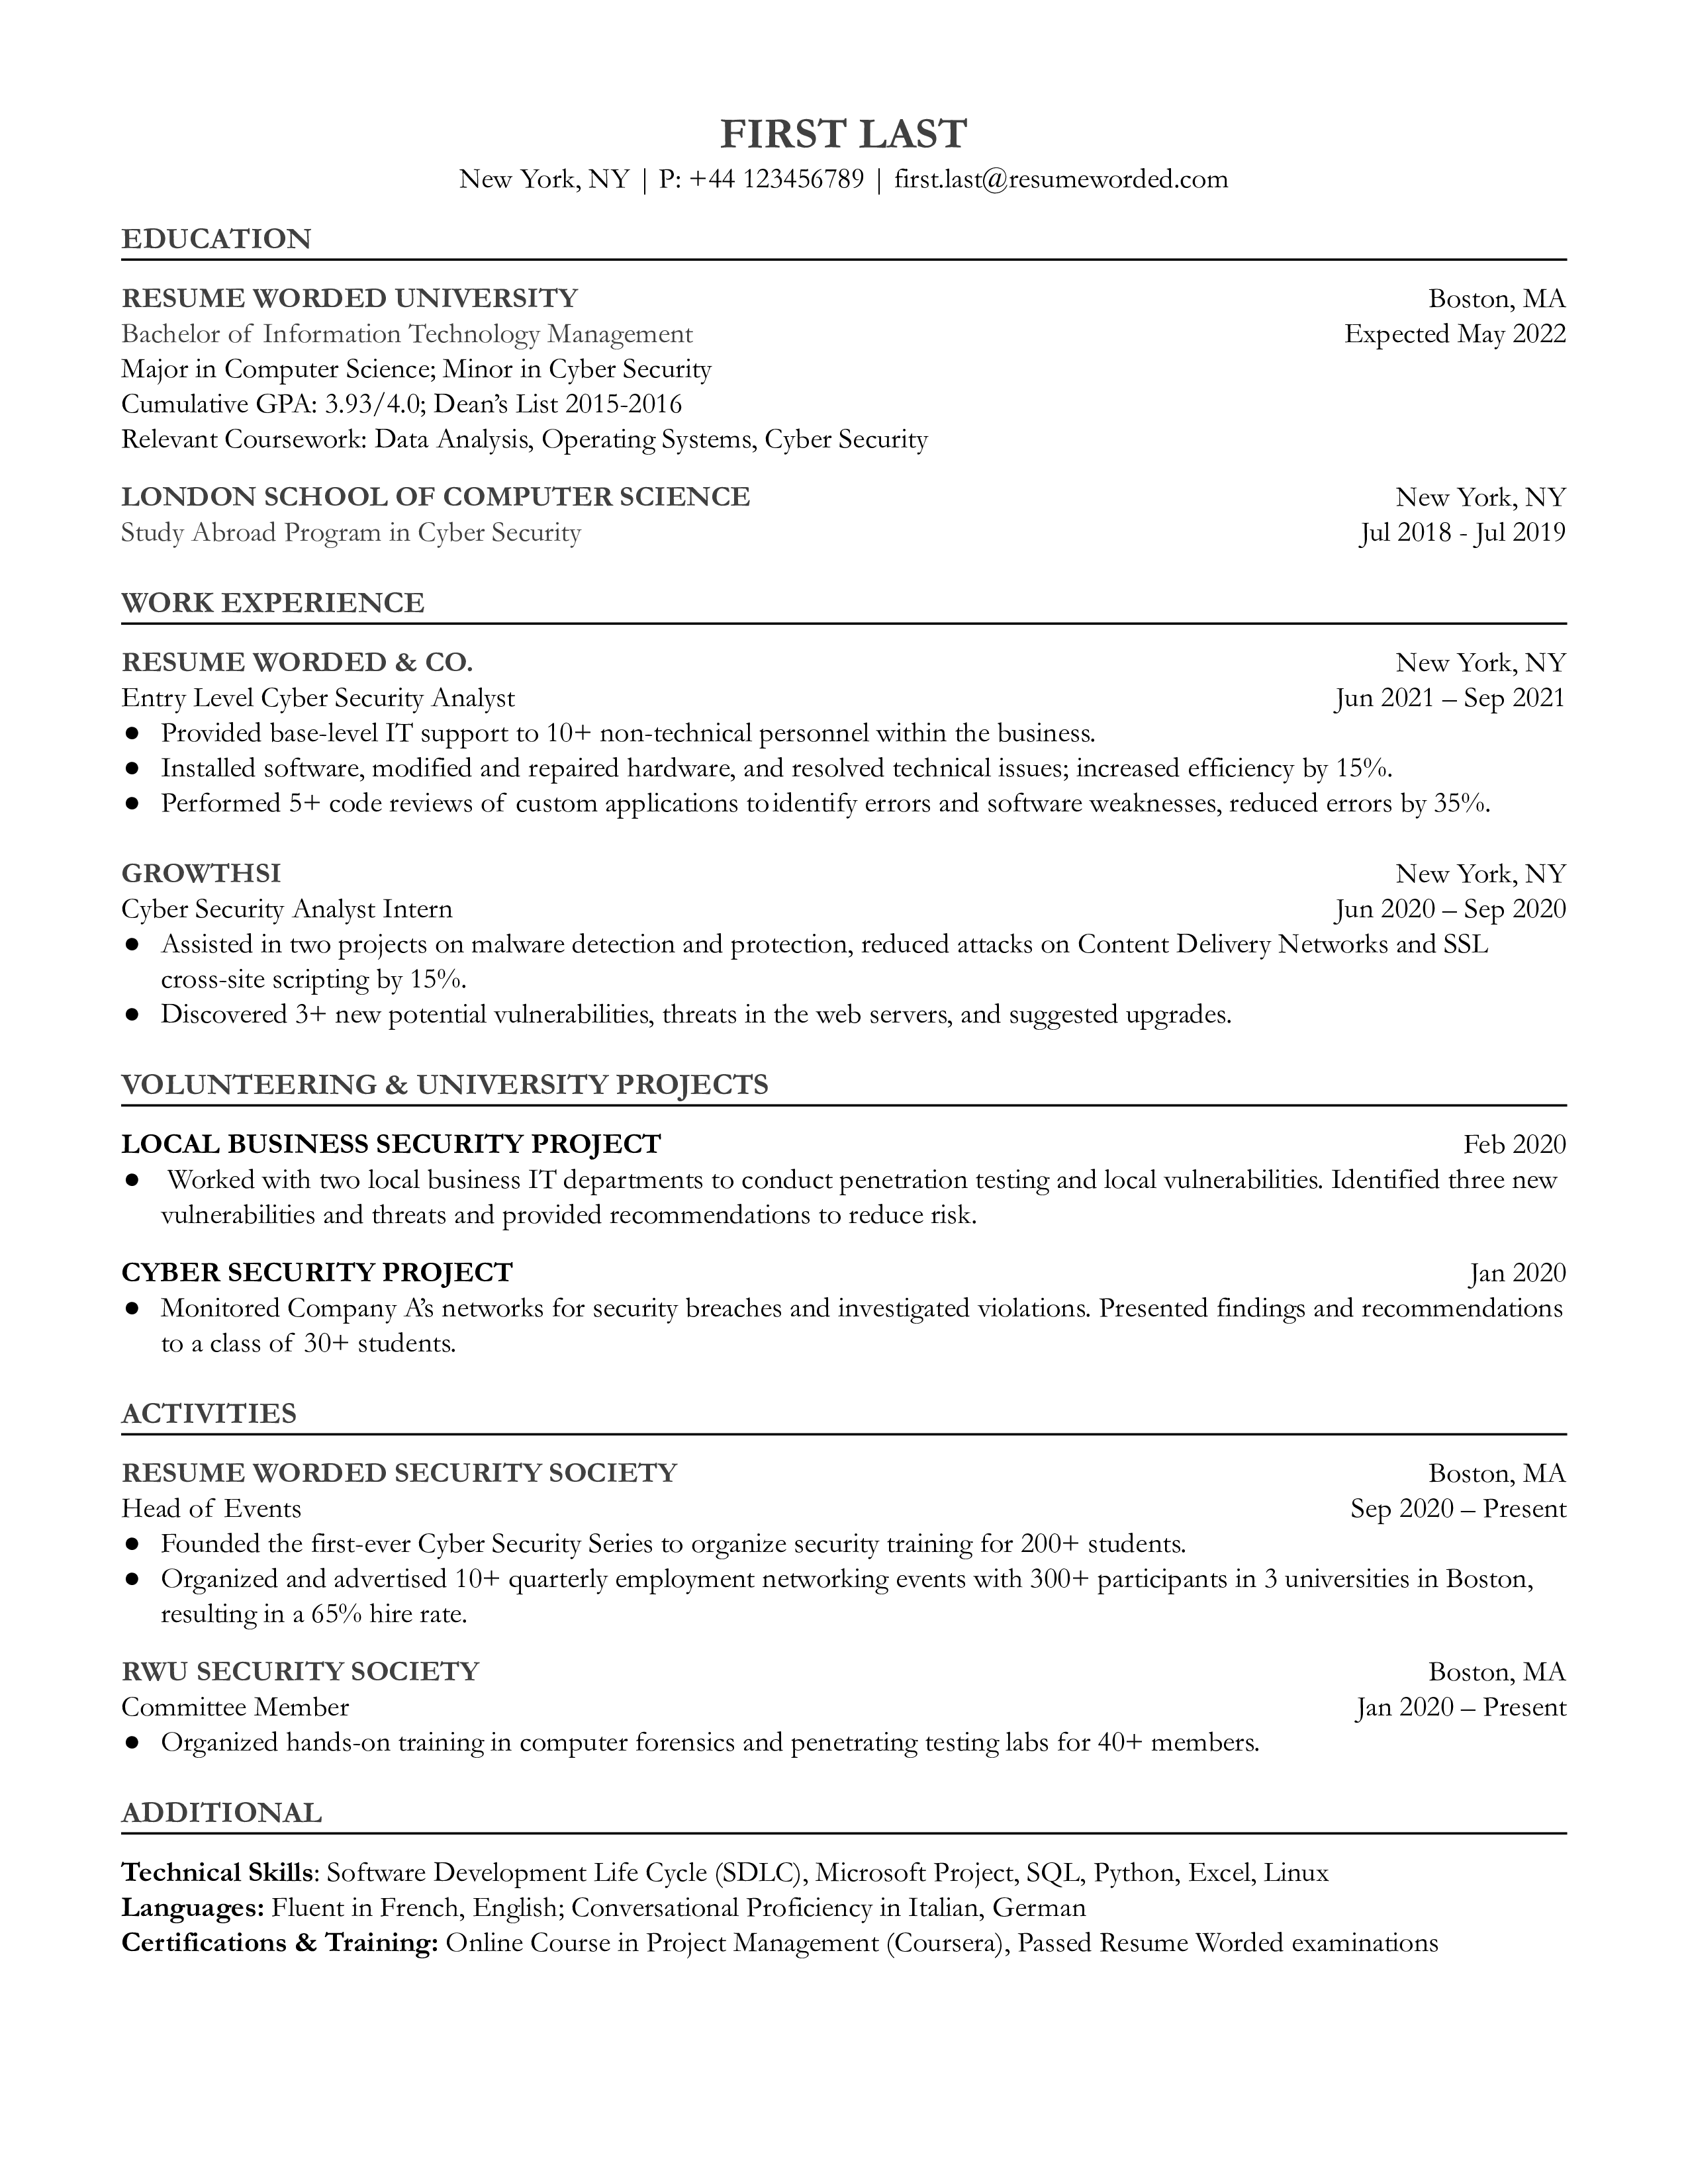 Entry Level Cyber Security Analyst Resume Sample